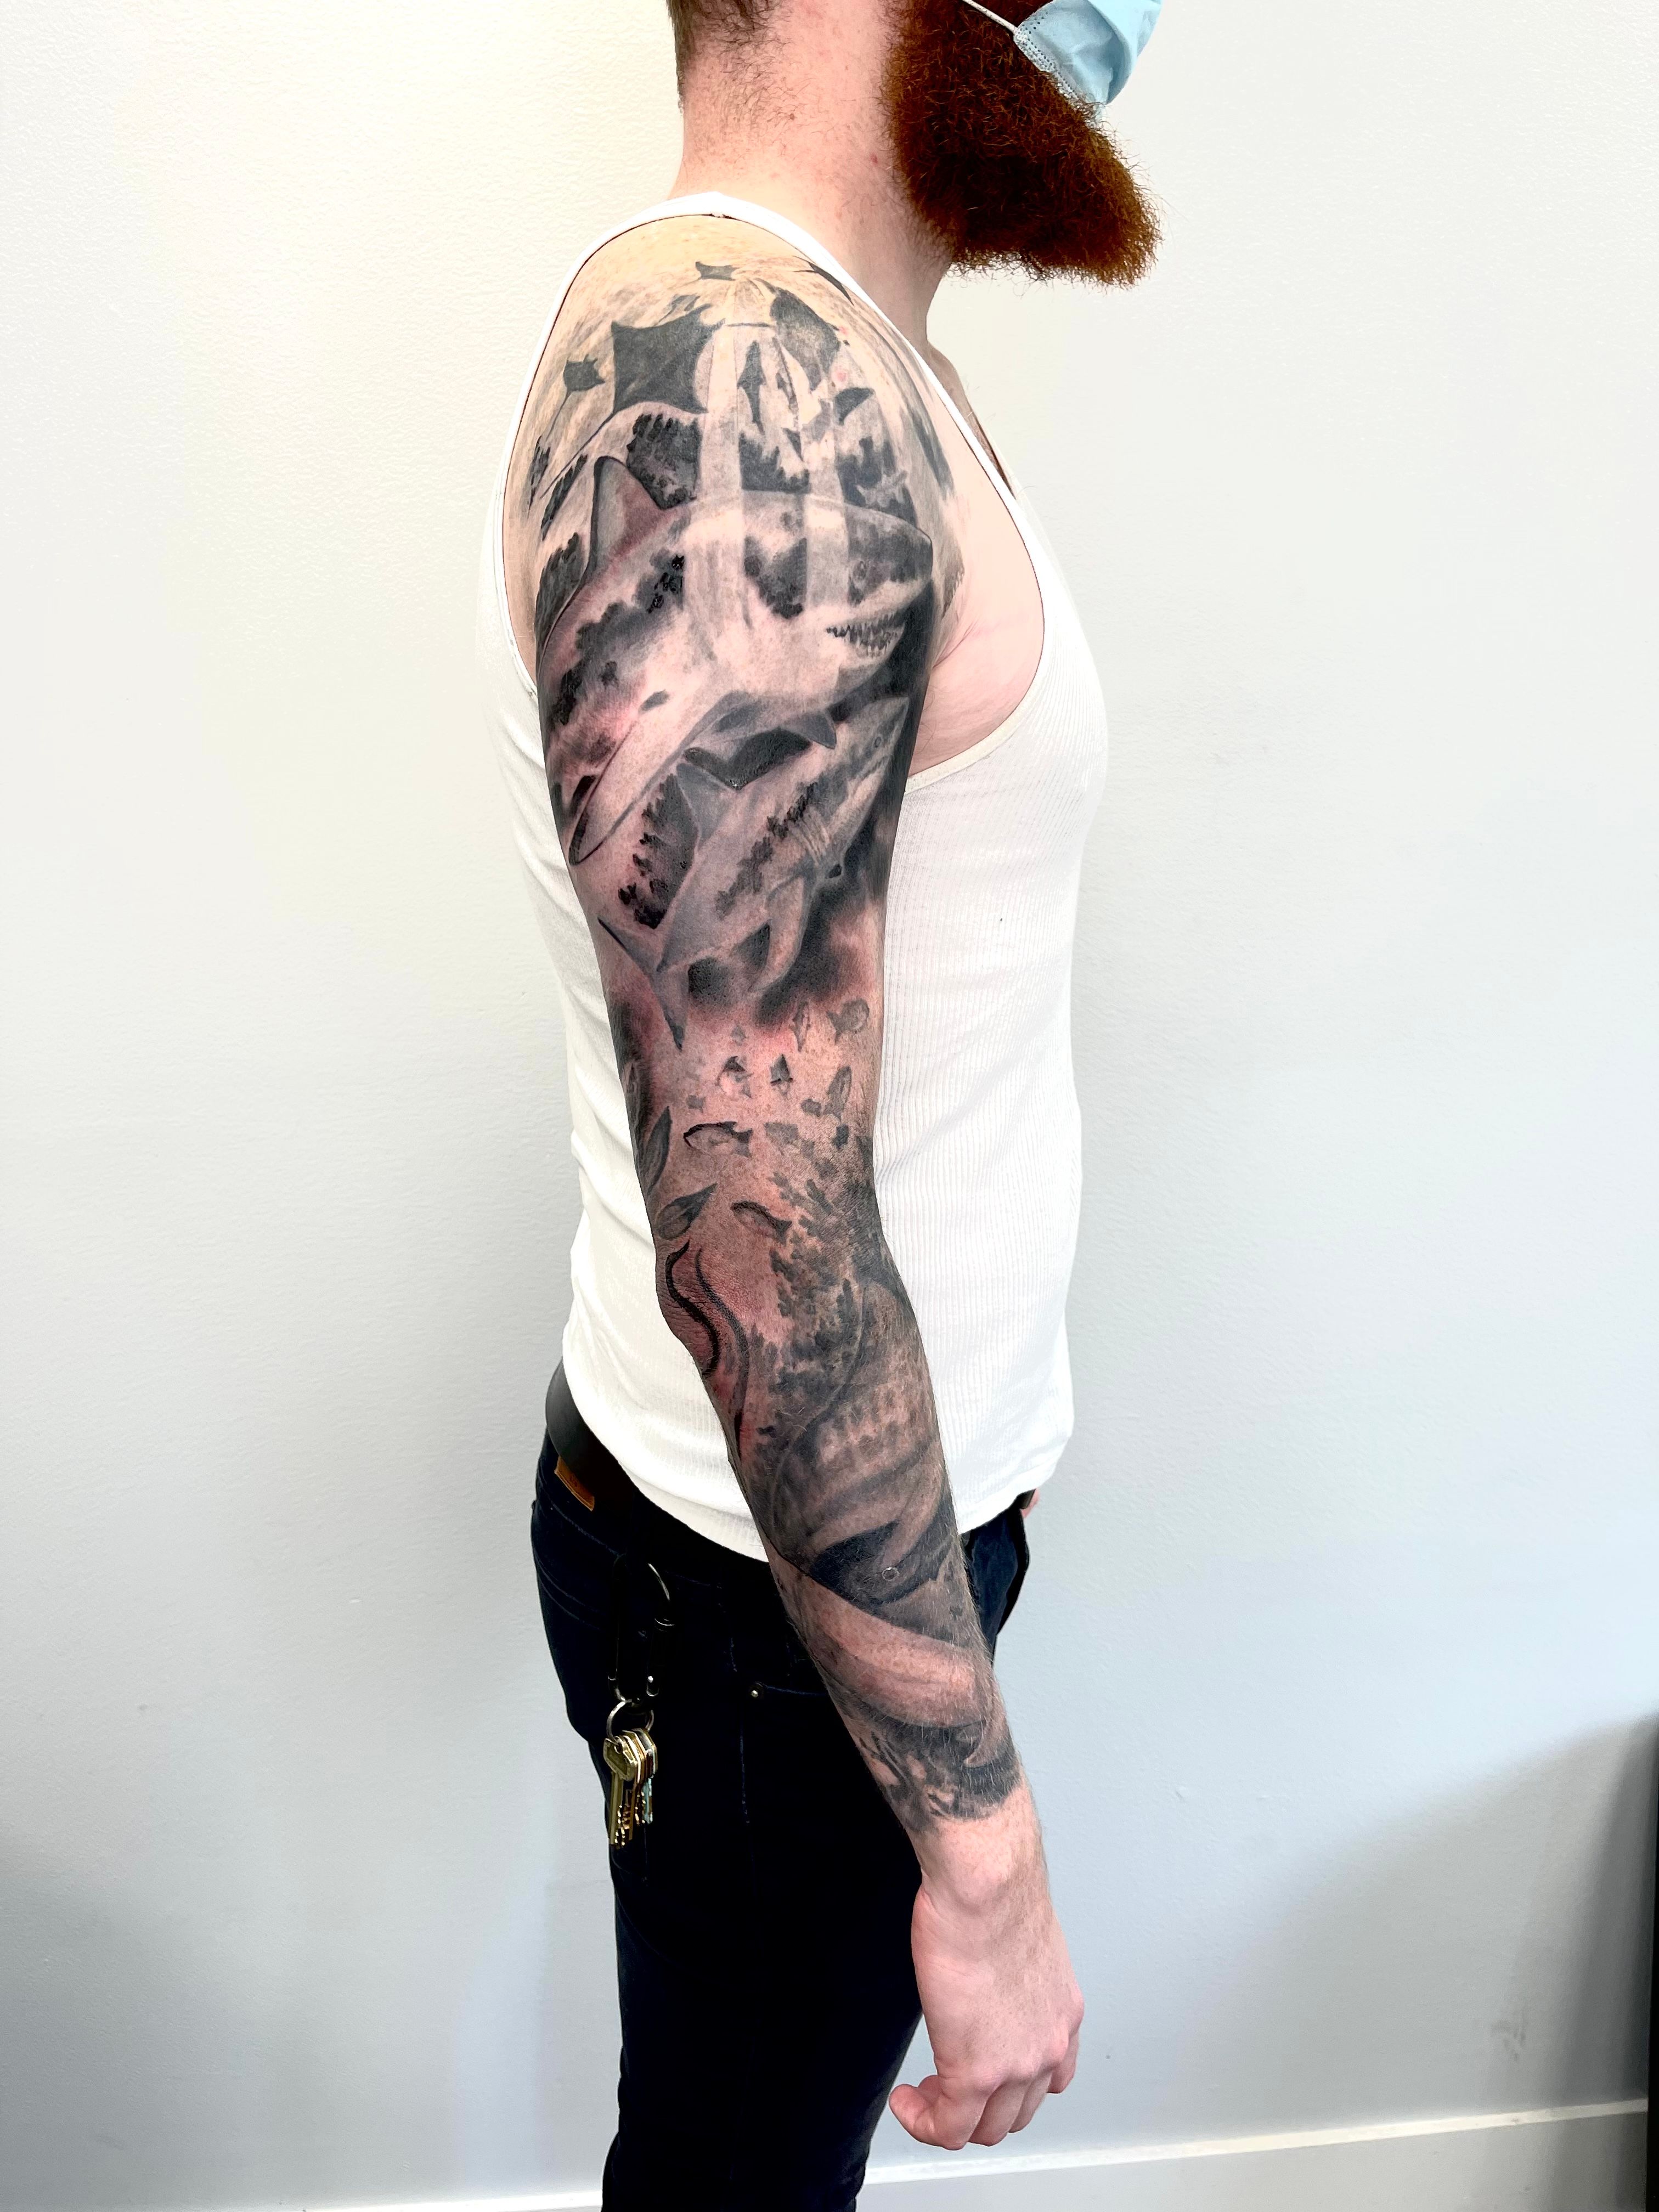 David Mushaney Tattoos  Art  Finished this underwater themed sleeve had  a lot